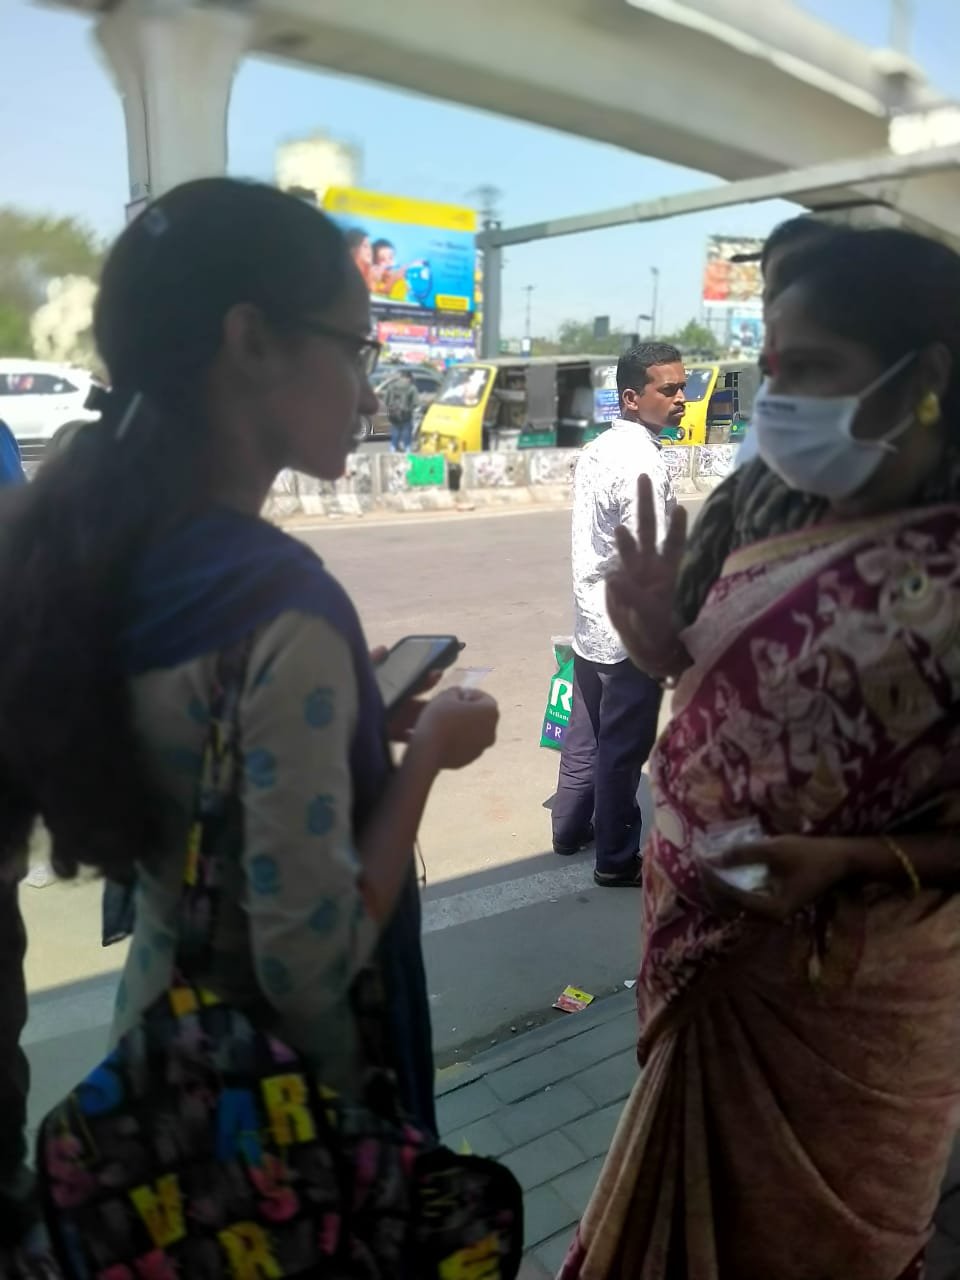 Coronavirus preventive medicine distributed by UARDT at Uppal Crossroads, Hyderabad on 15-March-2020